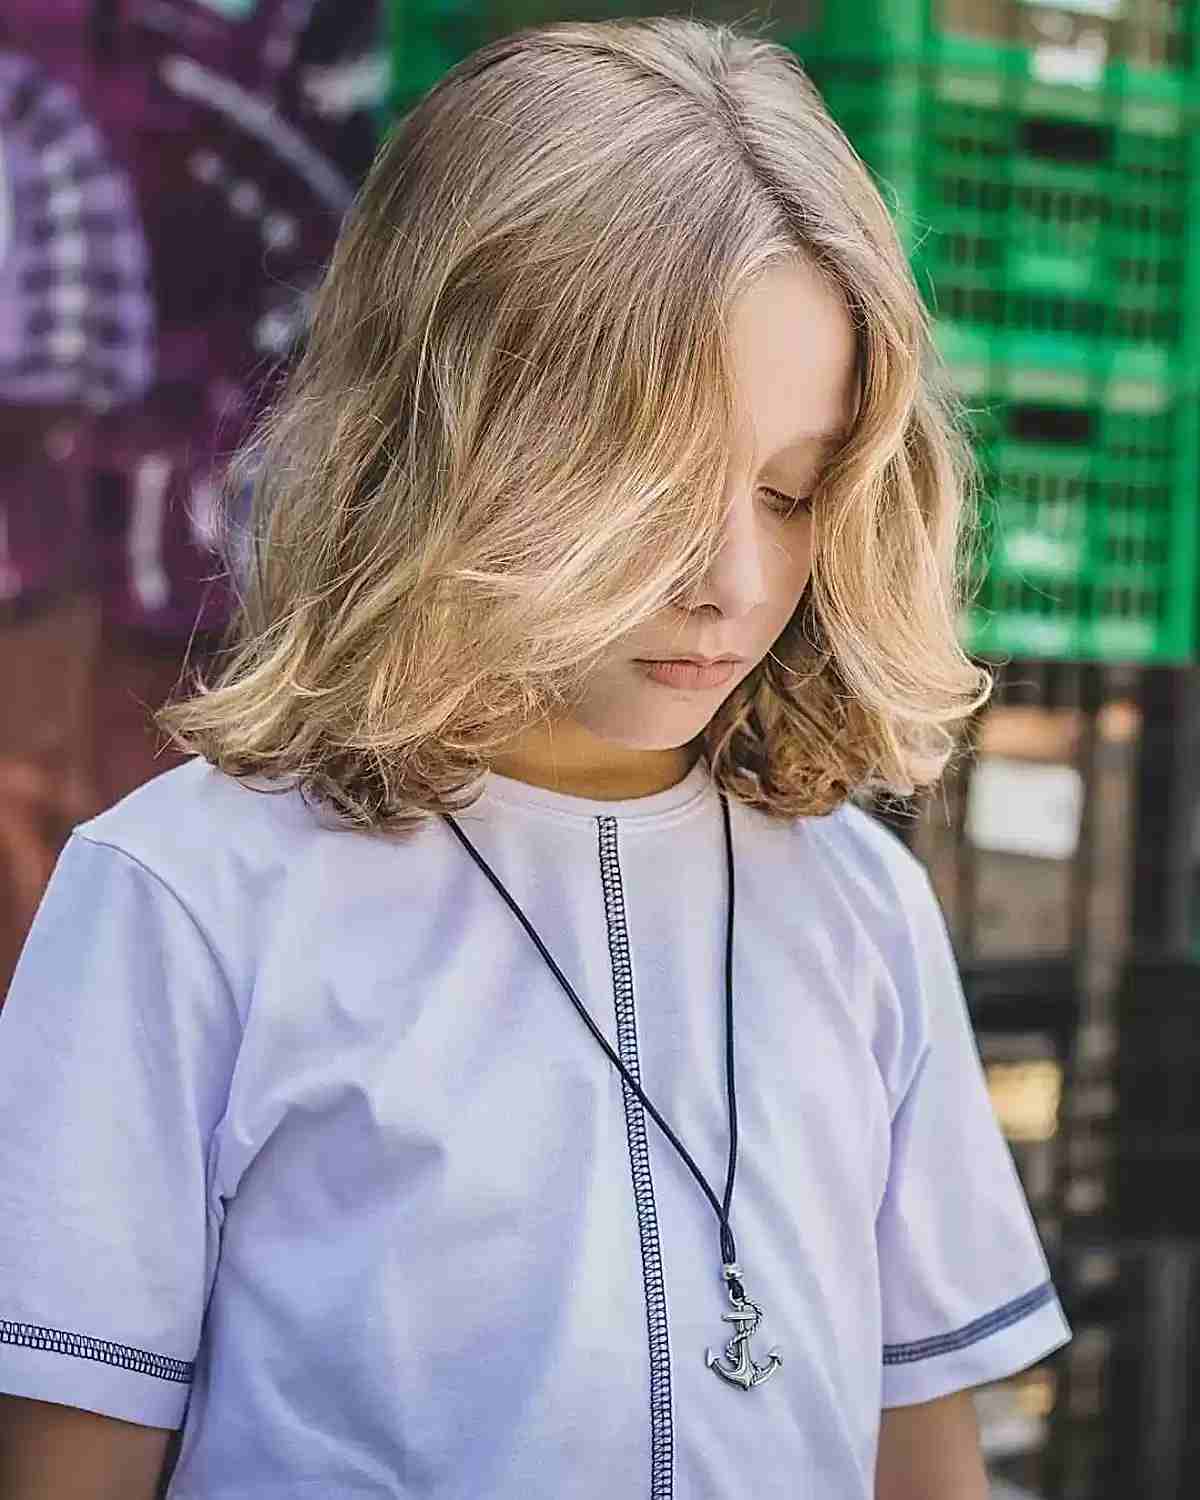 Neck-Length Textured Cut with Middle Part for Boys with Thick hair